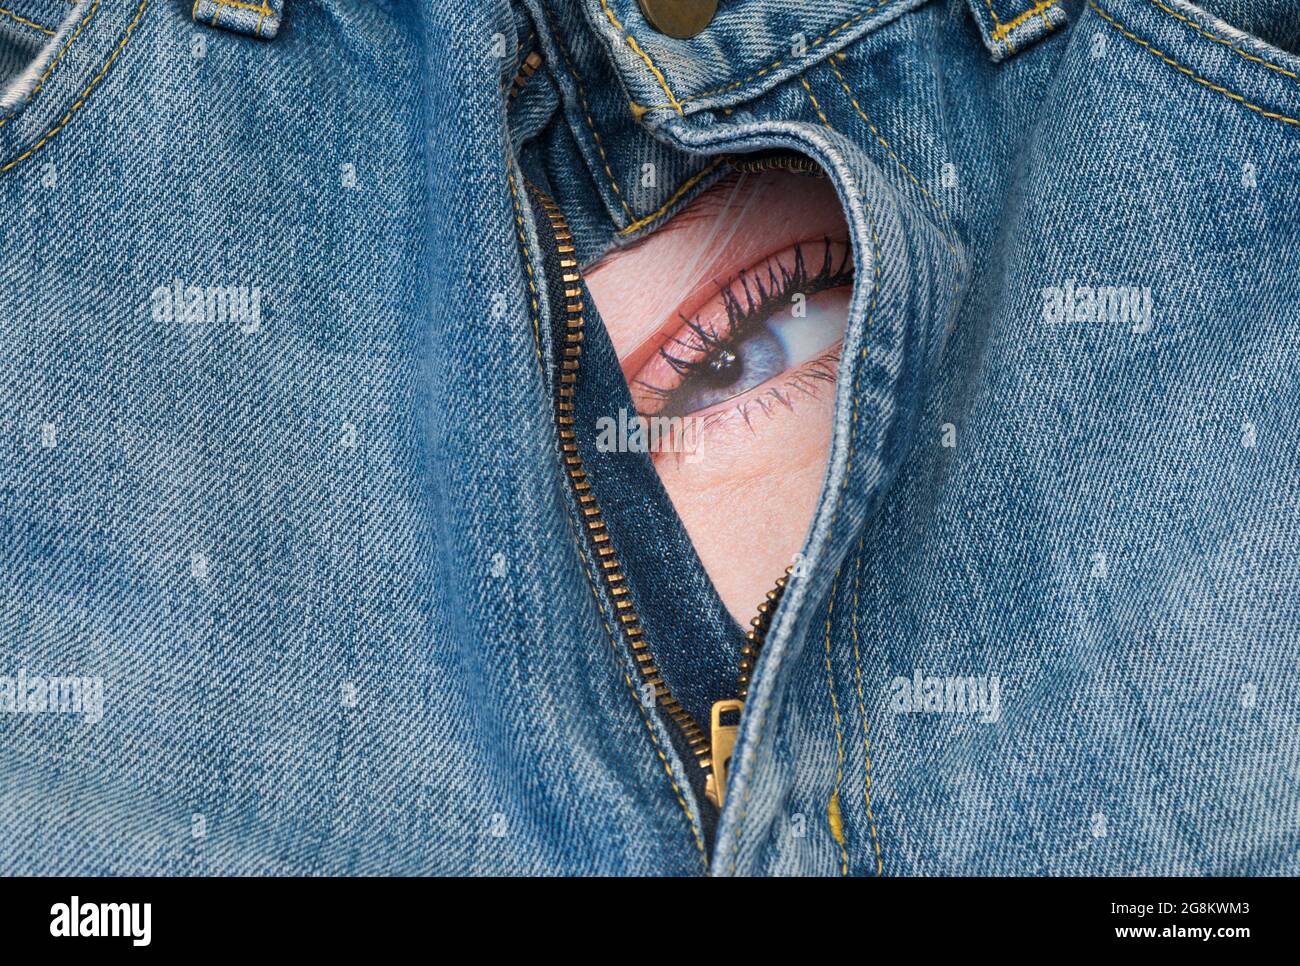 female eye looking from behind the open zipper of denim trousers Stock Photo